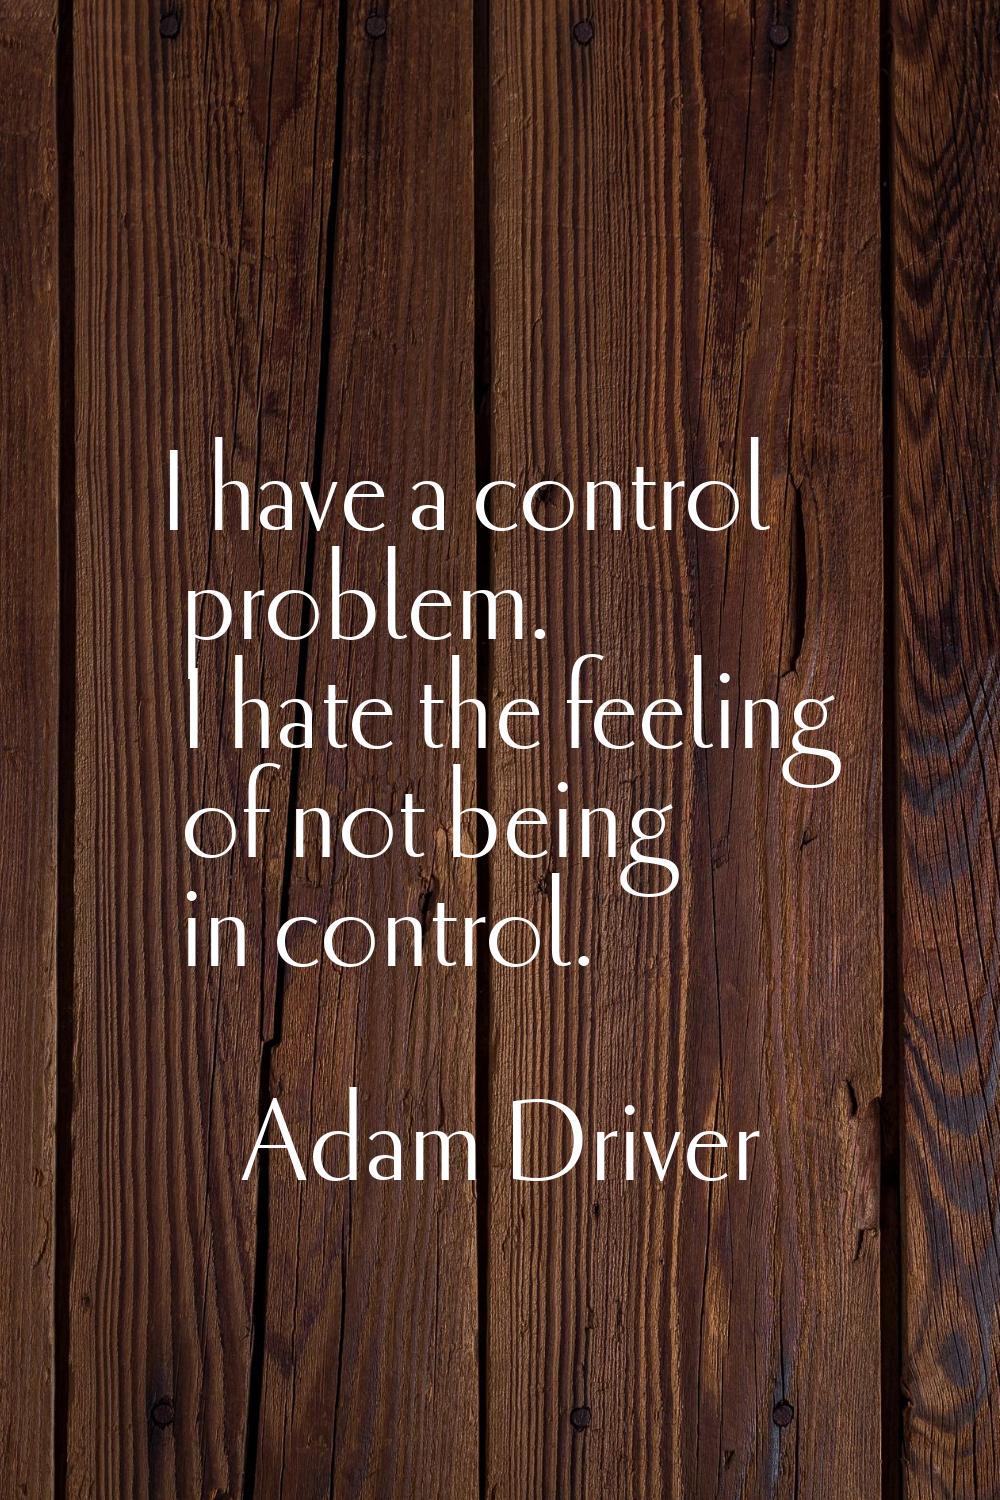 I have a control problem. I hate the feeling of not being in control.